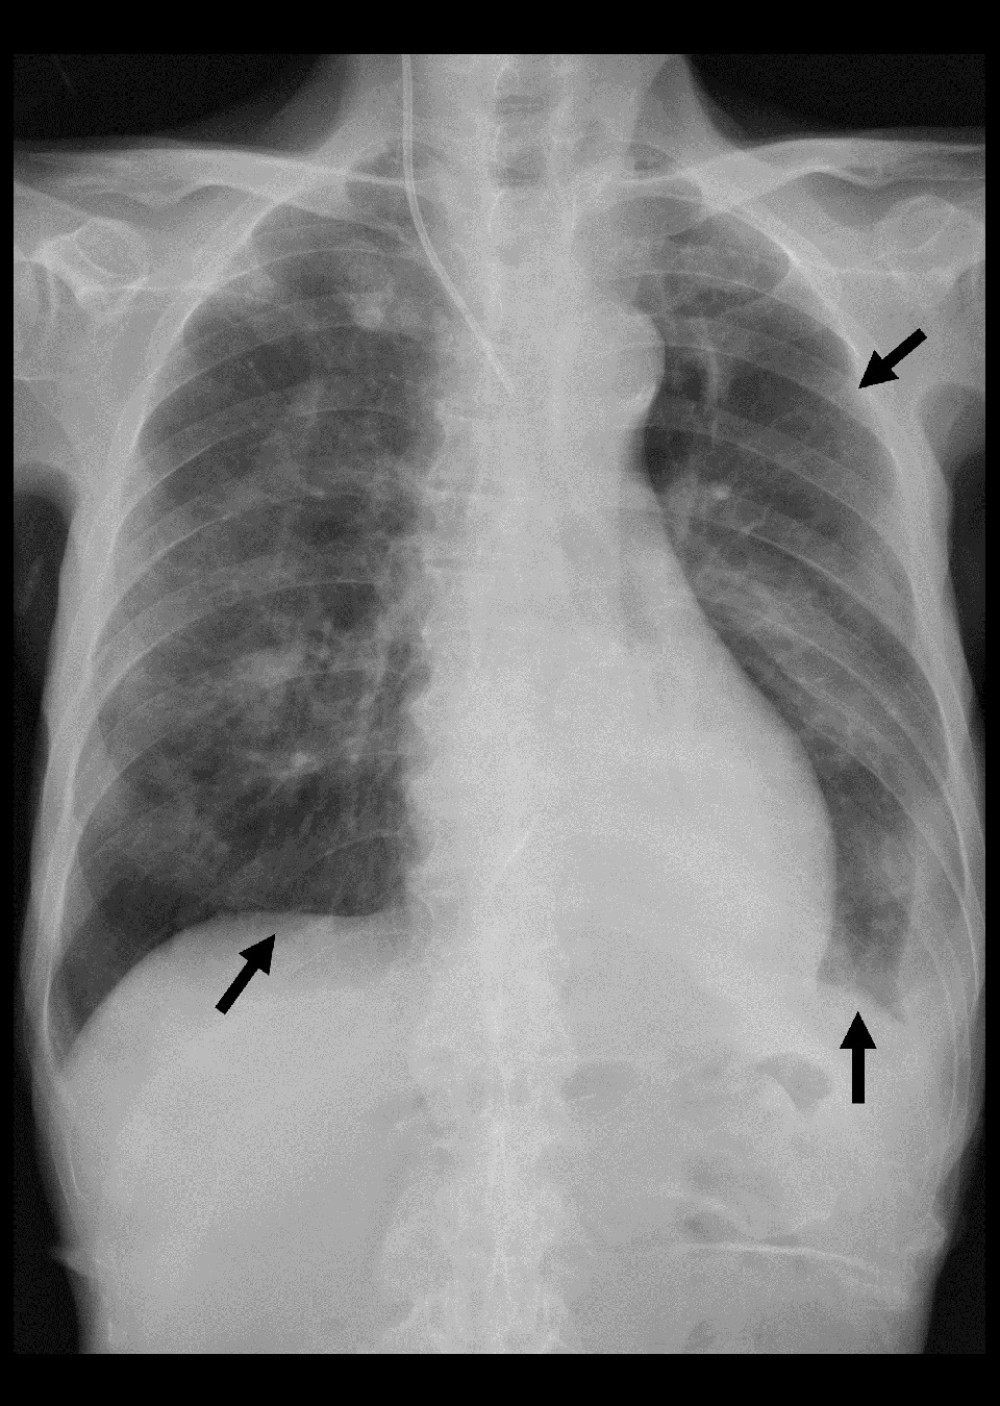 Improved chest X-ray of the patient. Infiltration shadows of the lower lung fields and cavity formation of the upper lung are diminished and have disappeared (arrows).